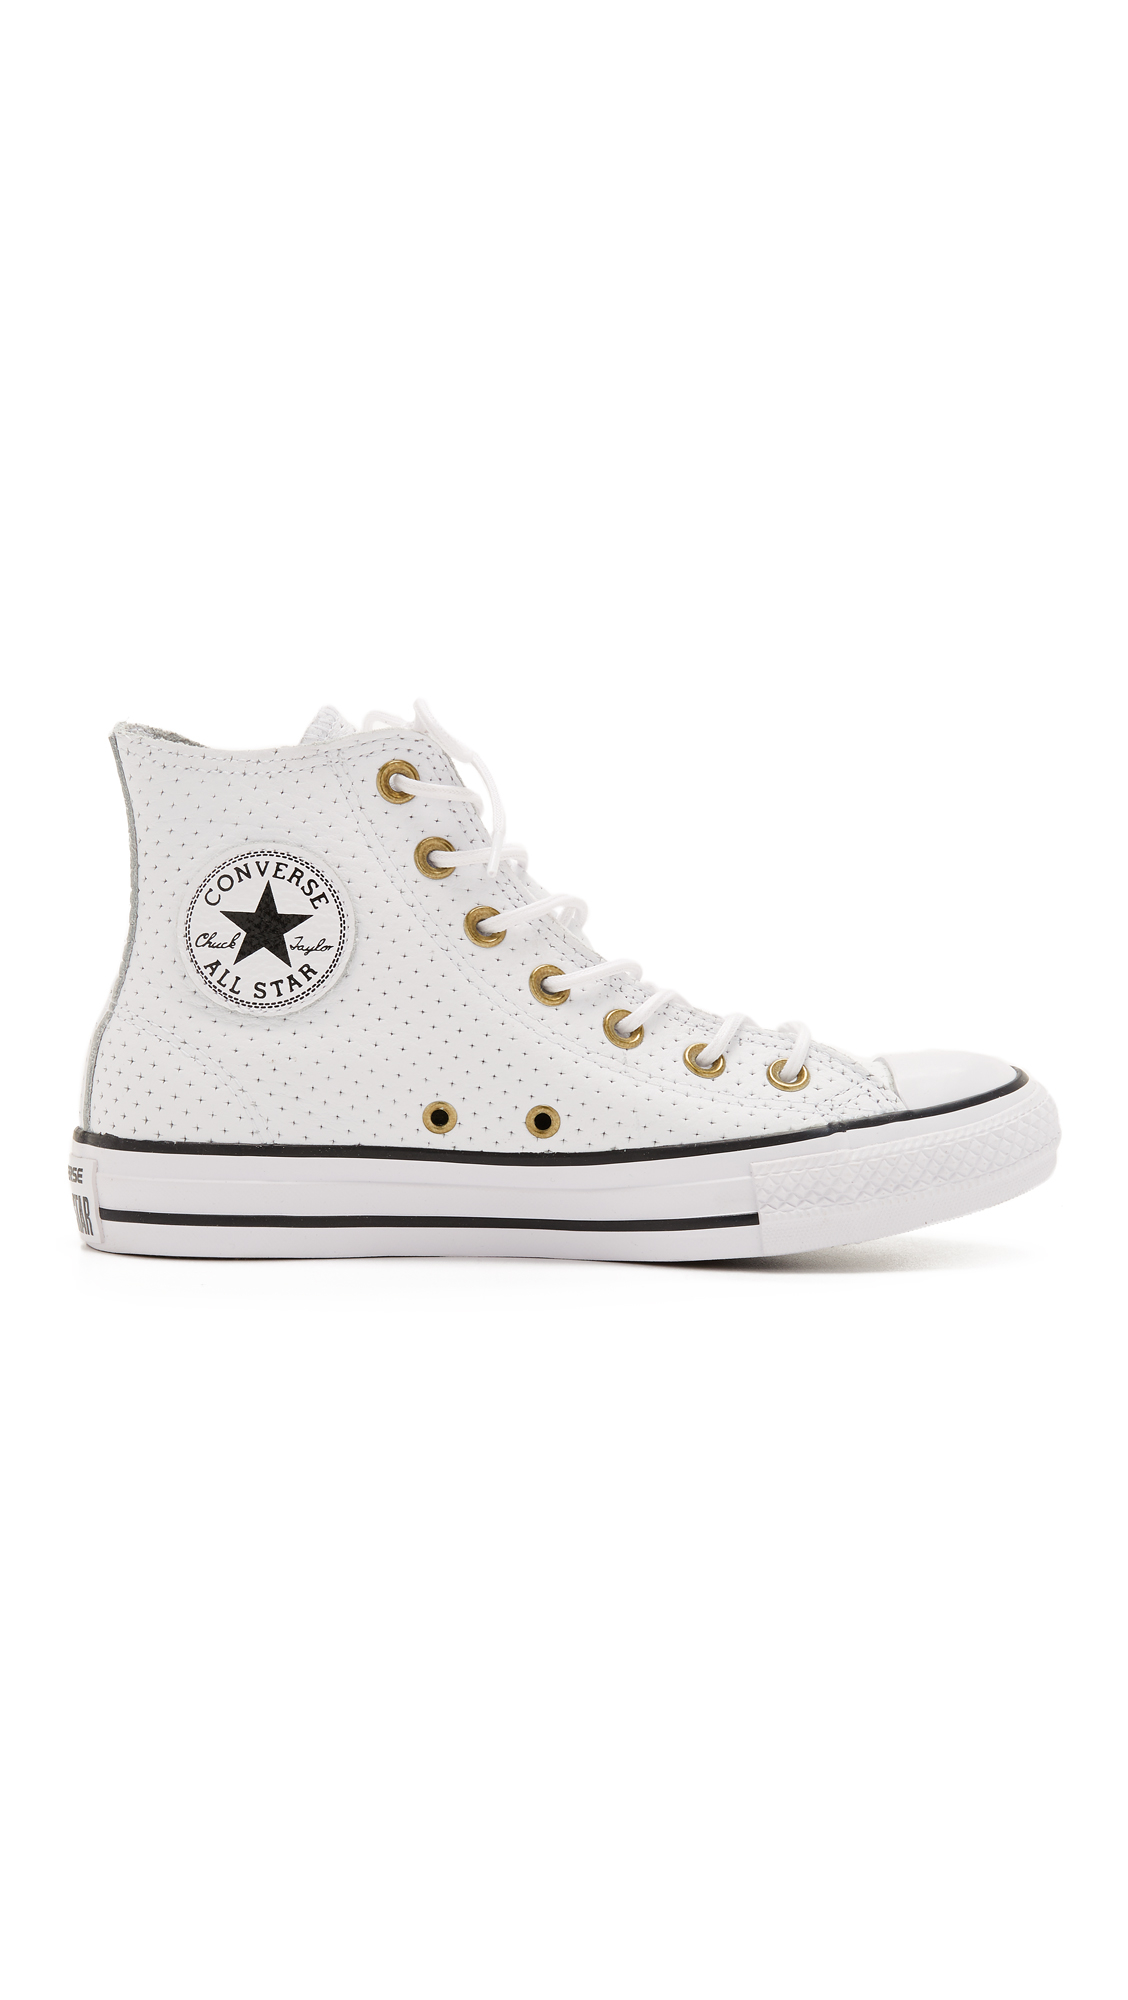 Converse Chuck Taylor All Star Motorcycle Sneakers in White - Lyst